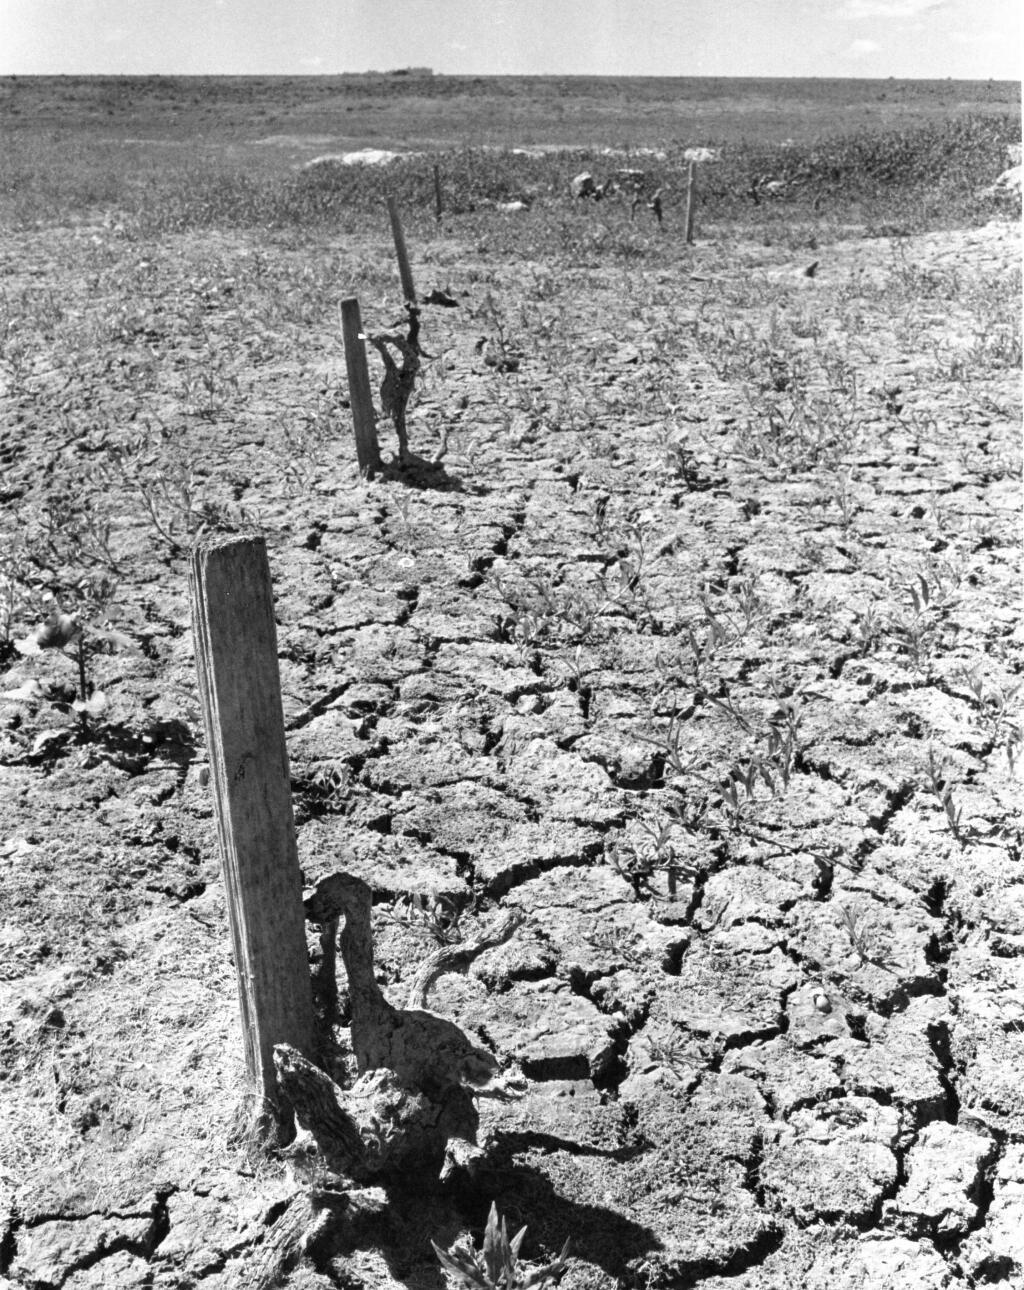 A photo of the dried lake bed of Lake Mendocino during the 1977 drought looks eerily similar this year’s drought. Lake Mendocino and Lake Sonoma currently provide drinking water to 600,000 people and are at lowest levels ever for this time of year. (The Press Democrat)